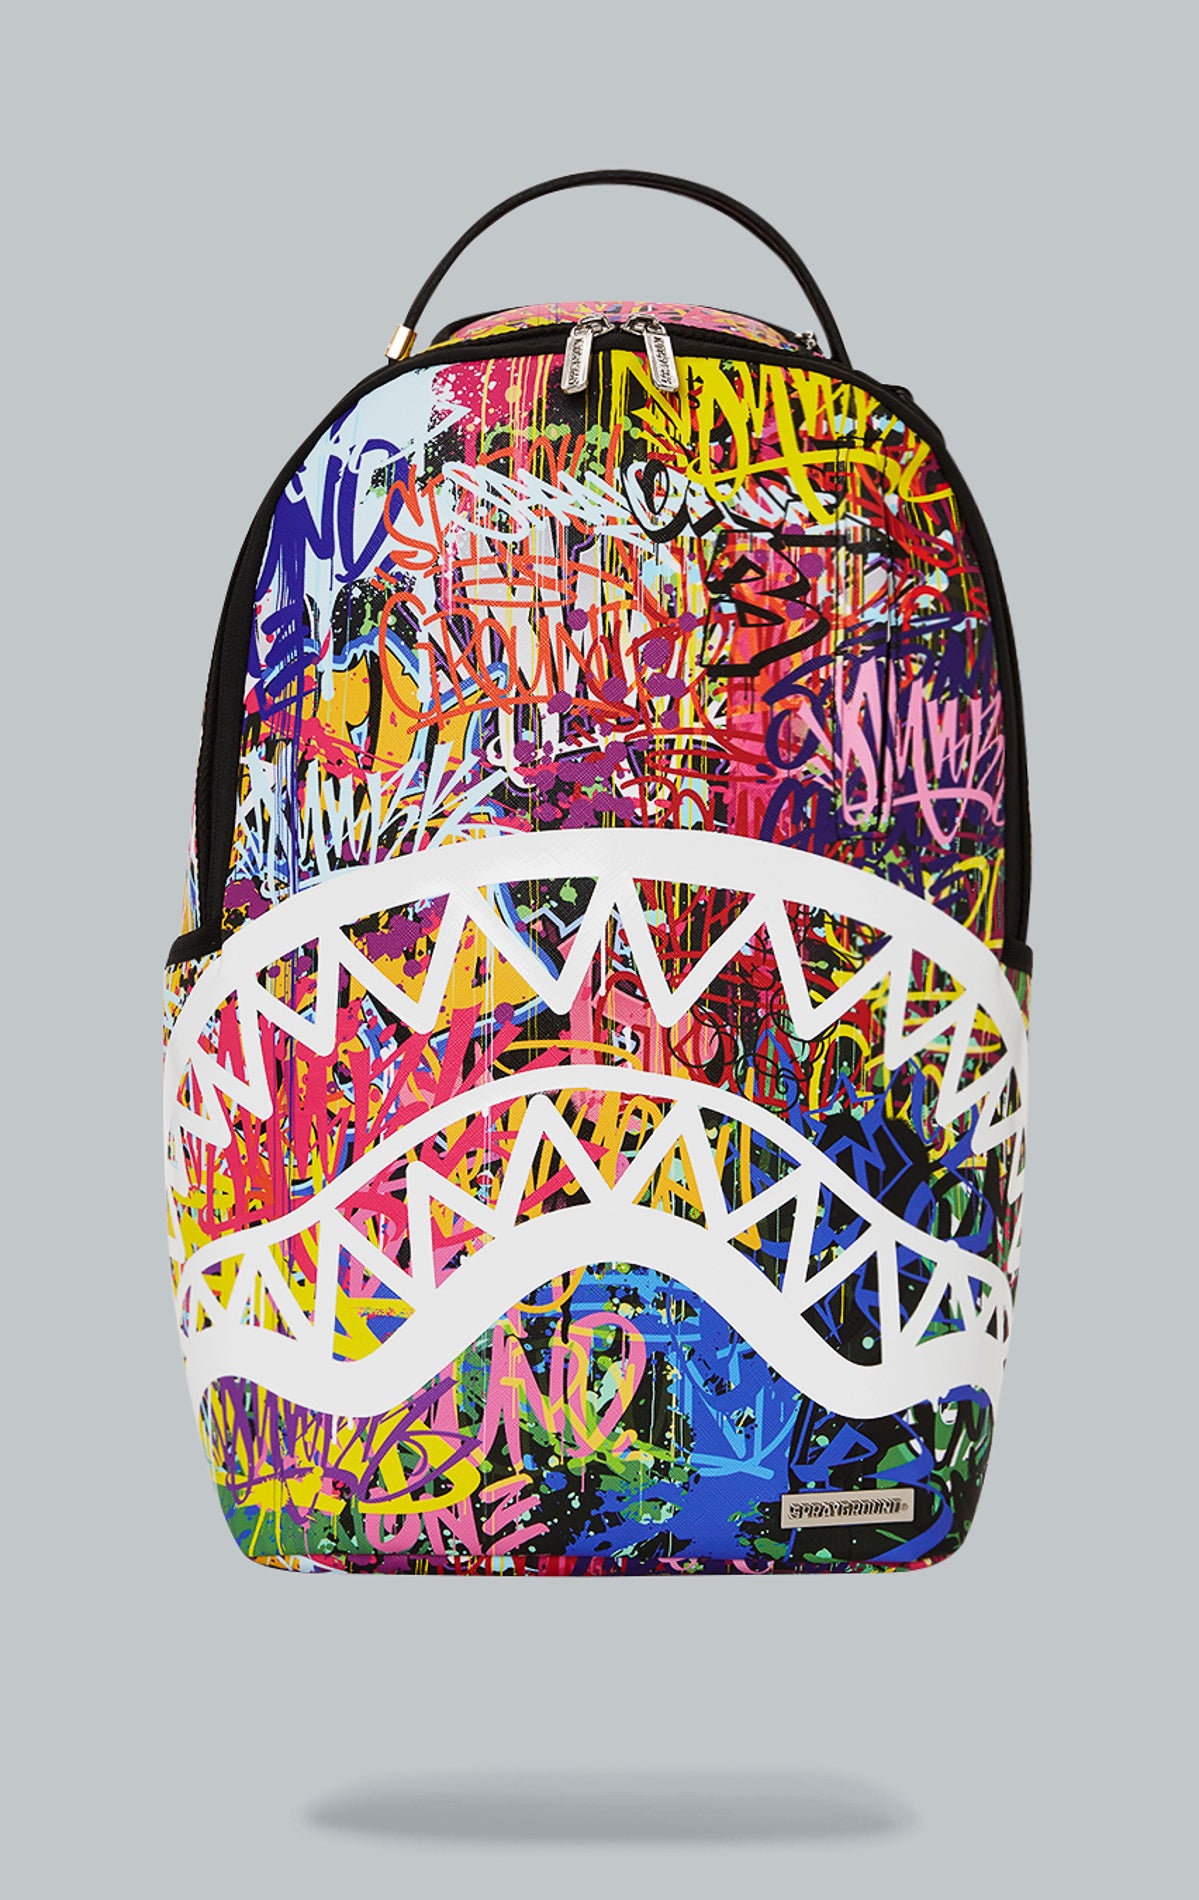 Sprayground Lower East Side Shark Backpack. The backpack is made from durable water-resistant faux leather (100%) and features a black exterior with a shark graphic. It includes a front zipper pocket, side pockets, a zippered stash pocket, a separate velour sunglass compartment, ergonomic mesh back padding, adjustable straps, gold zippers with metal hardware, and a metal 